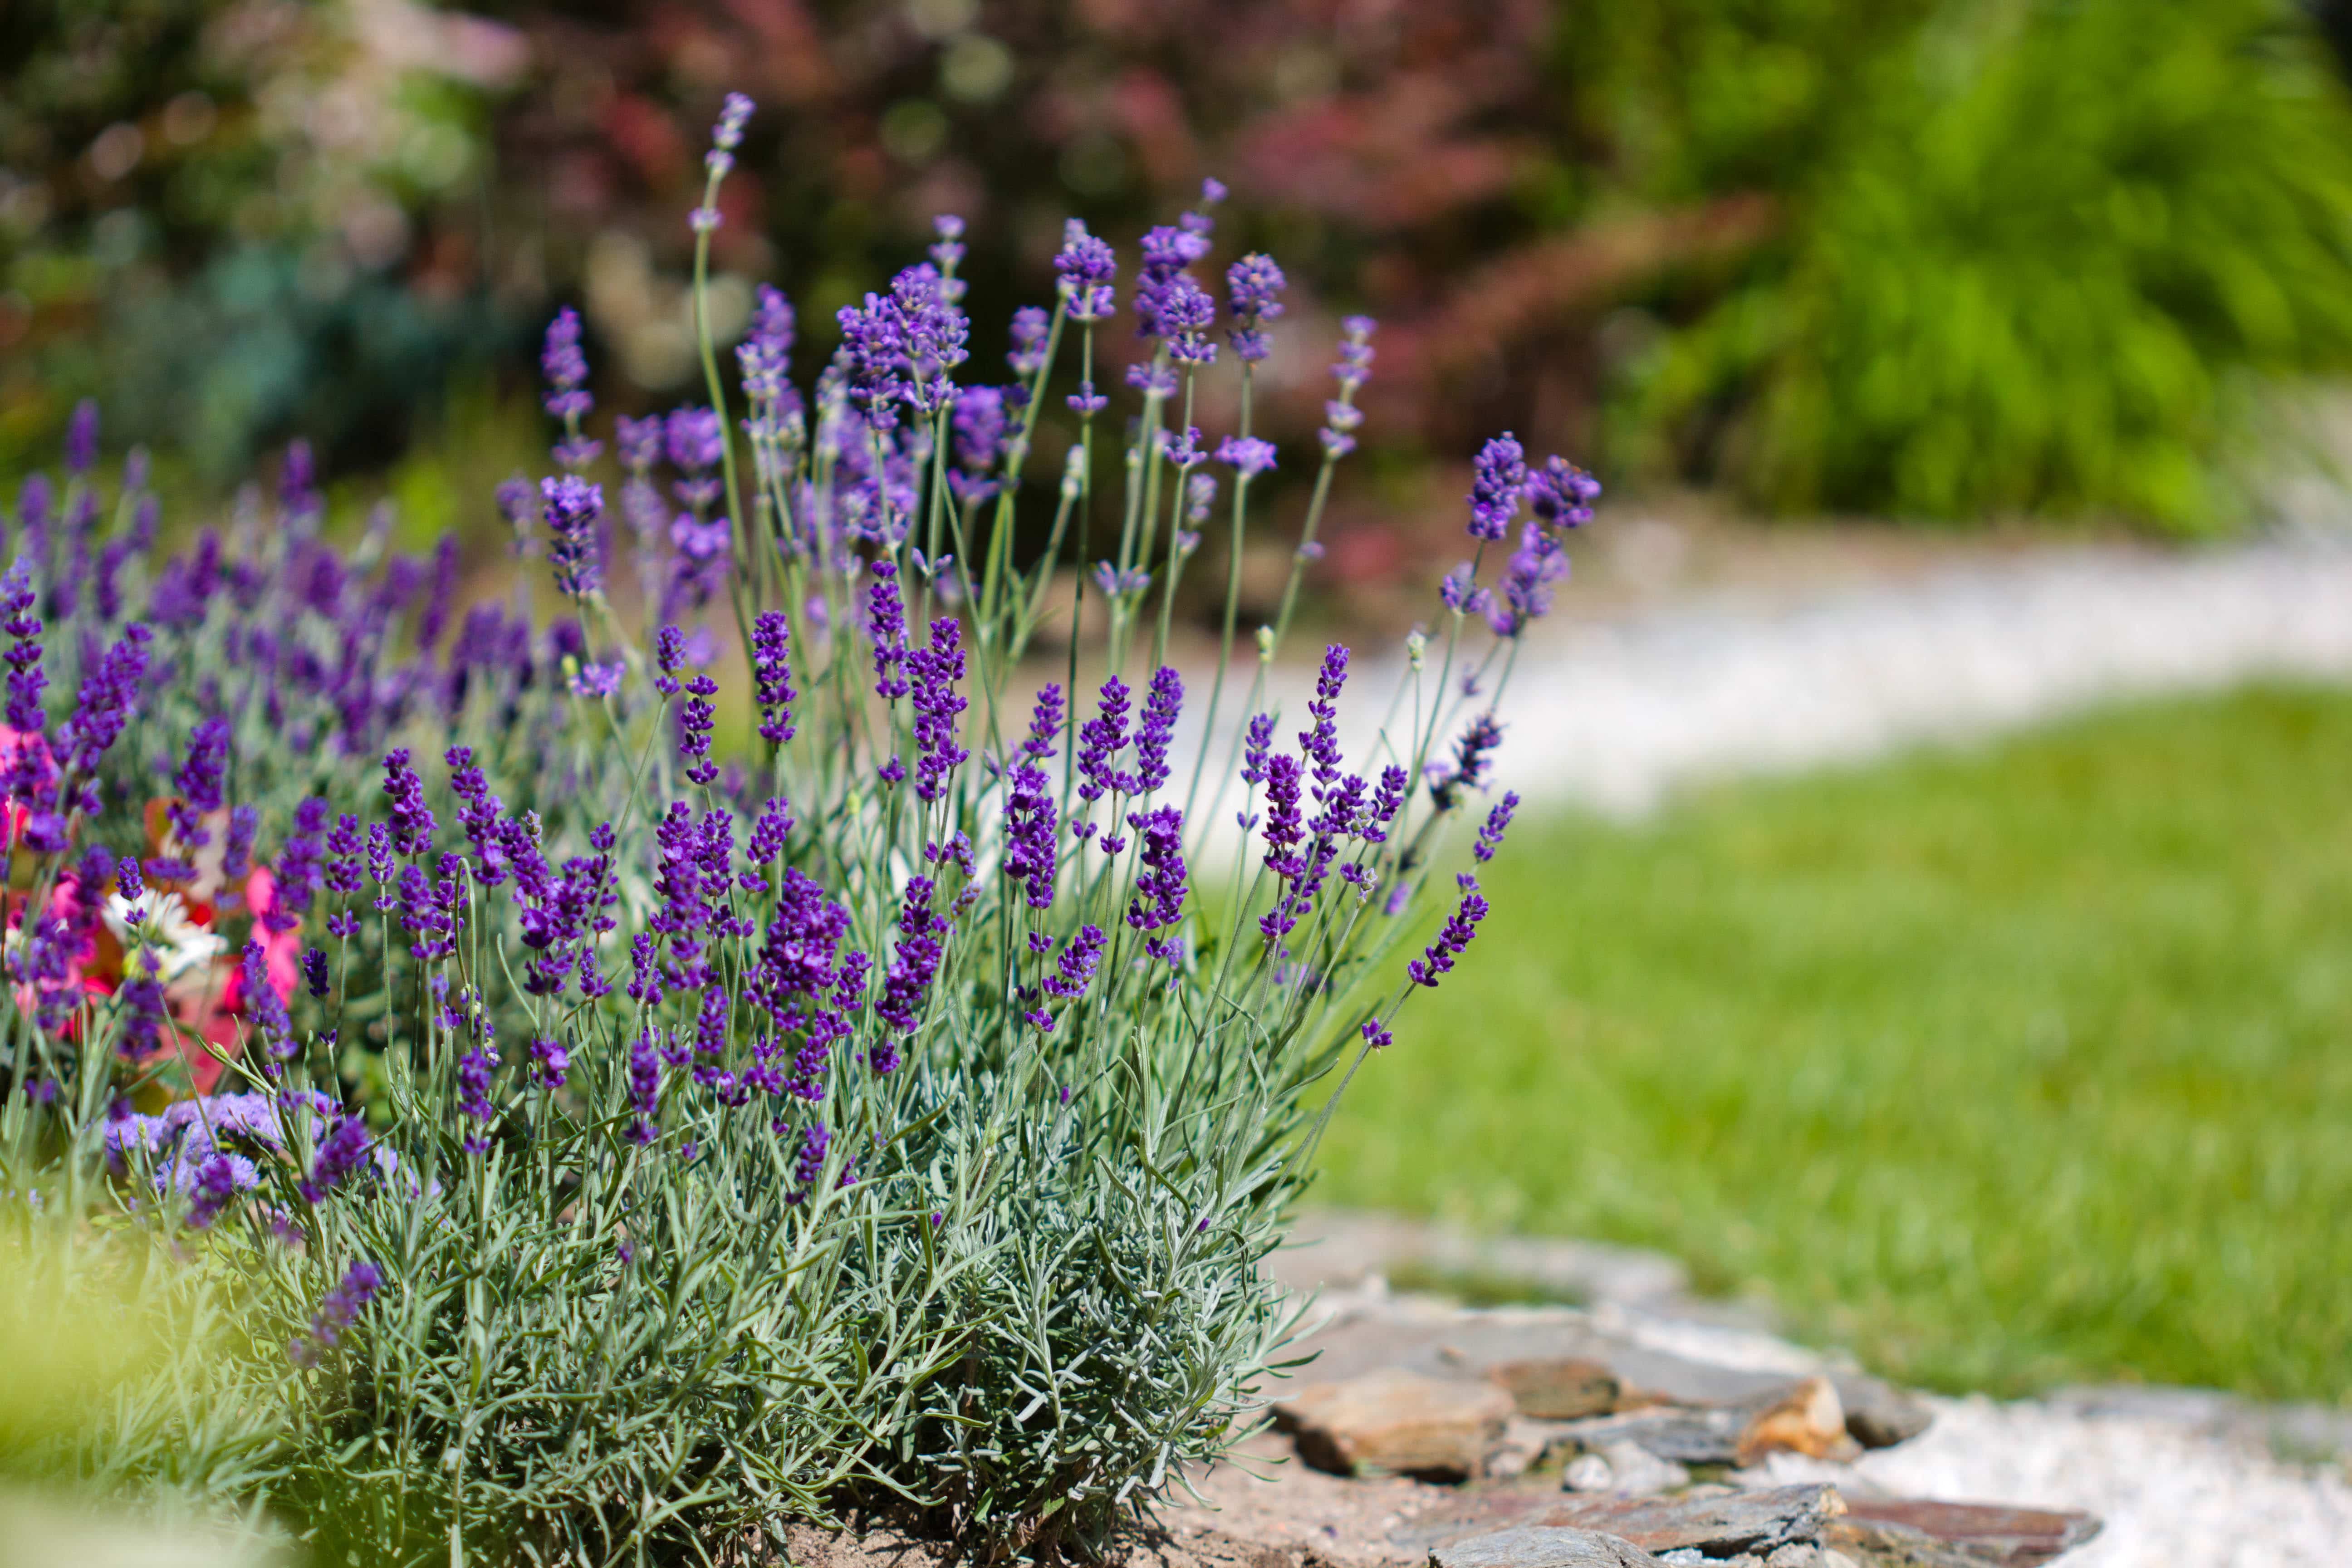 5 mood-boosting plants and herbs - Cultivation Street